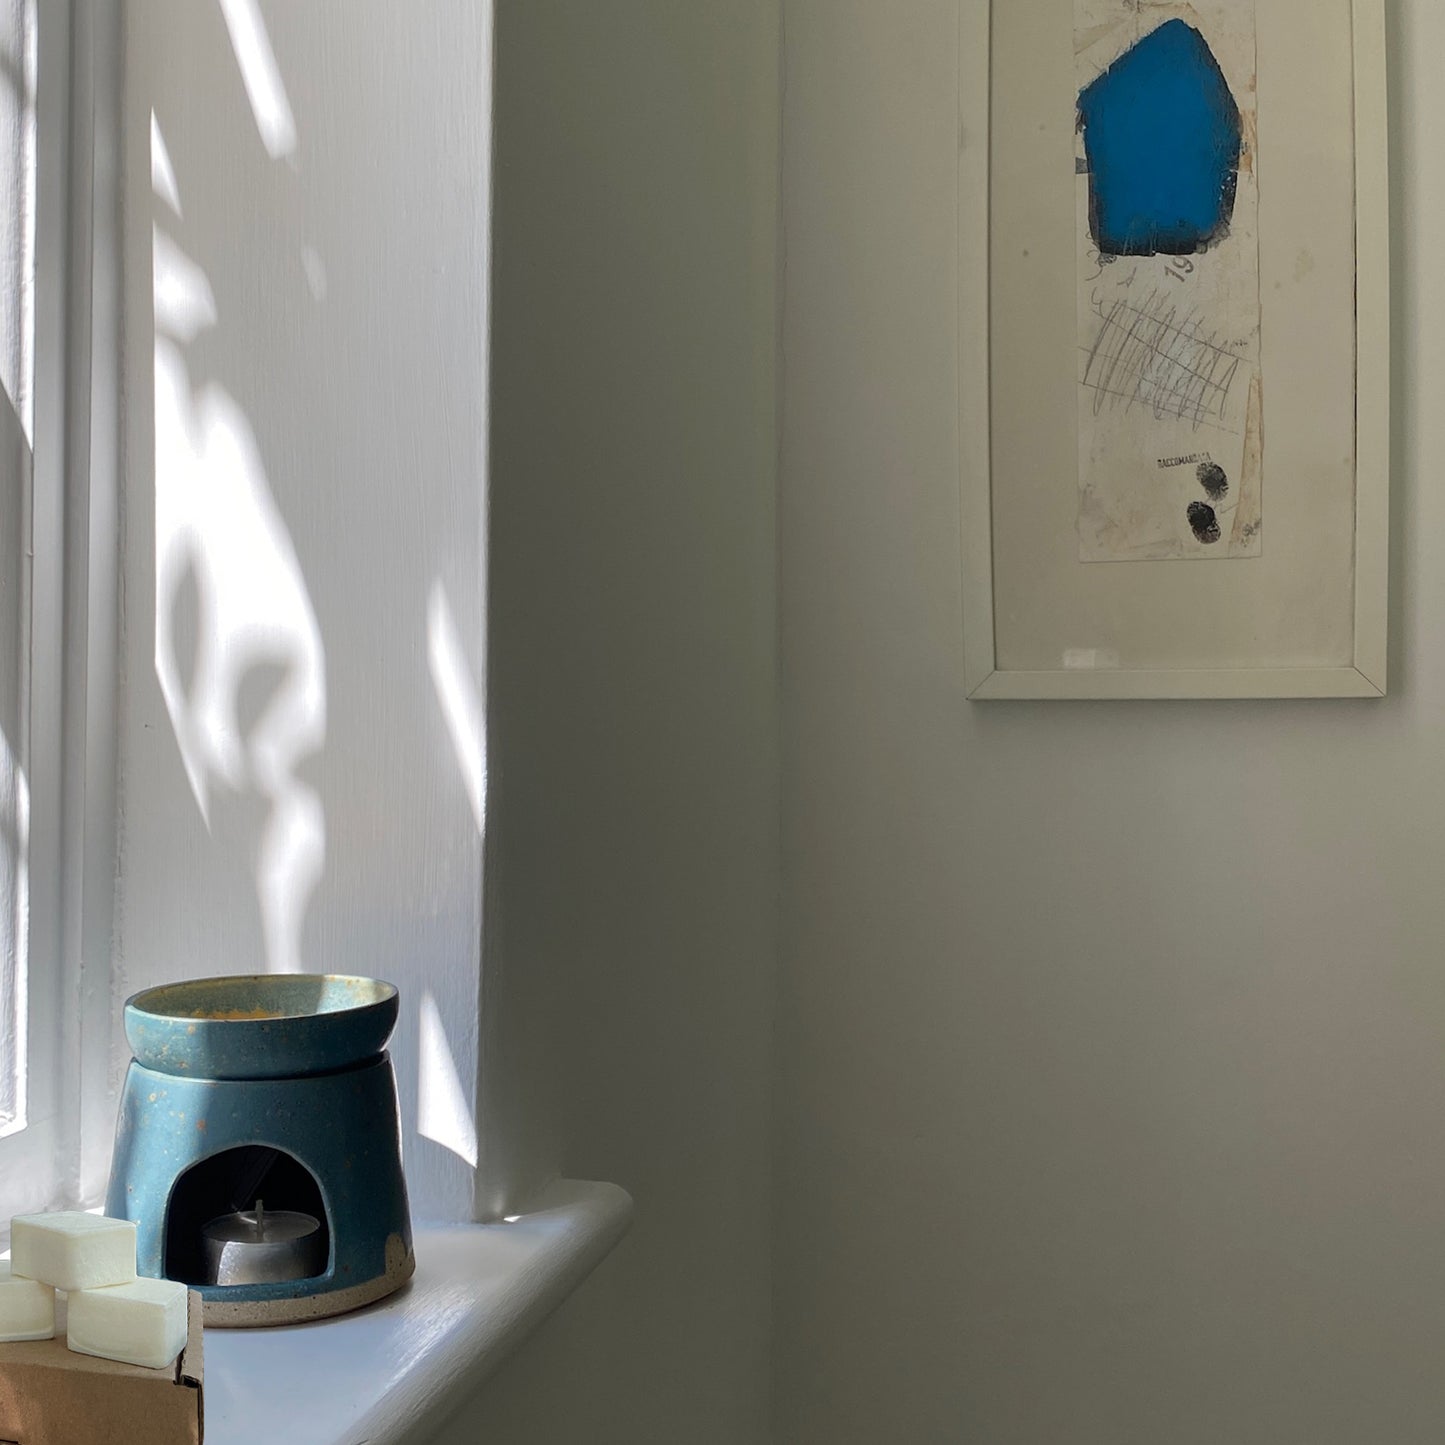 Bouclé London teal ceramic oil burner sitting in a minimal home alongside luxury wax melts made in east london and brighton